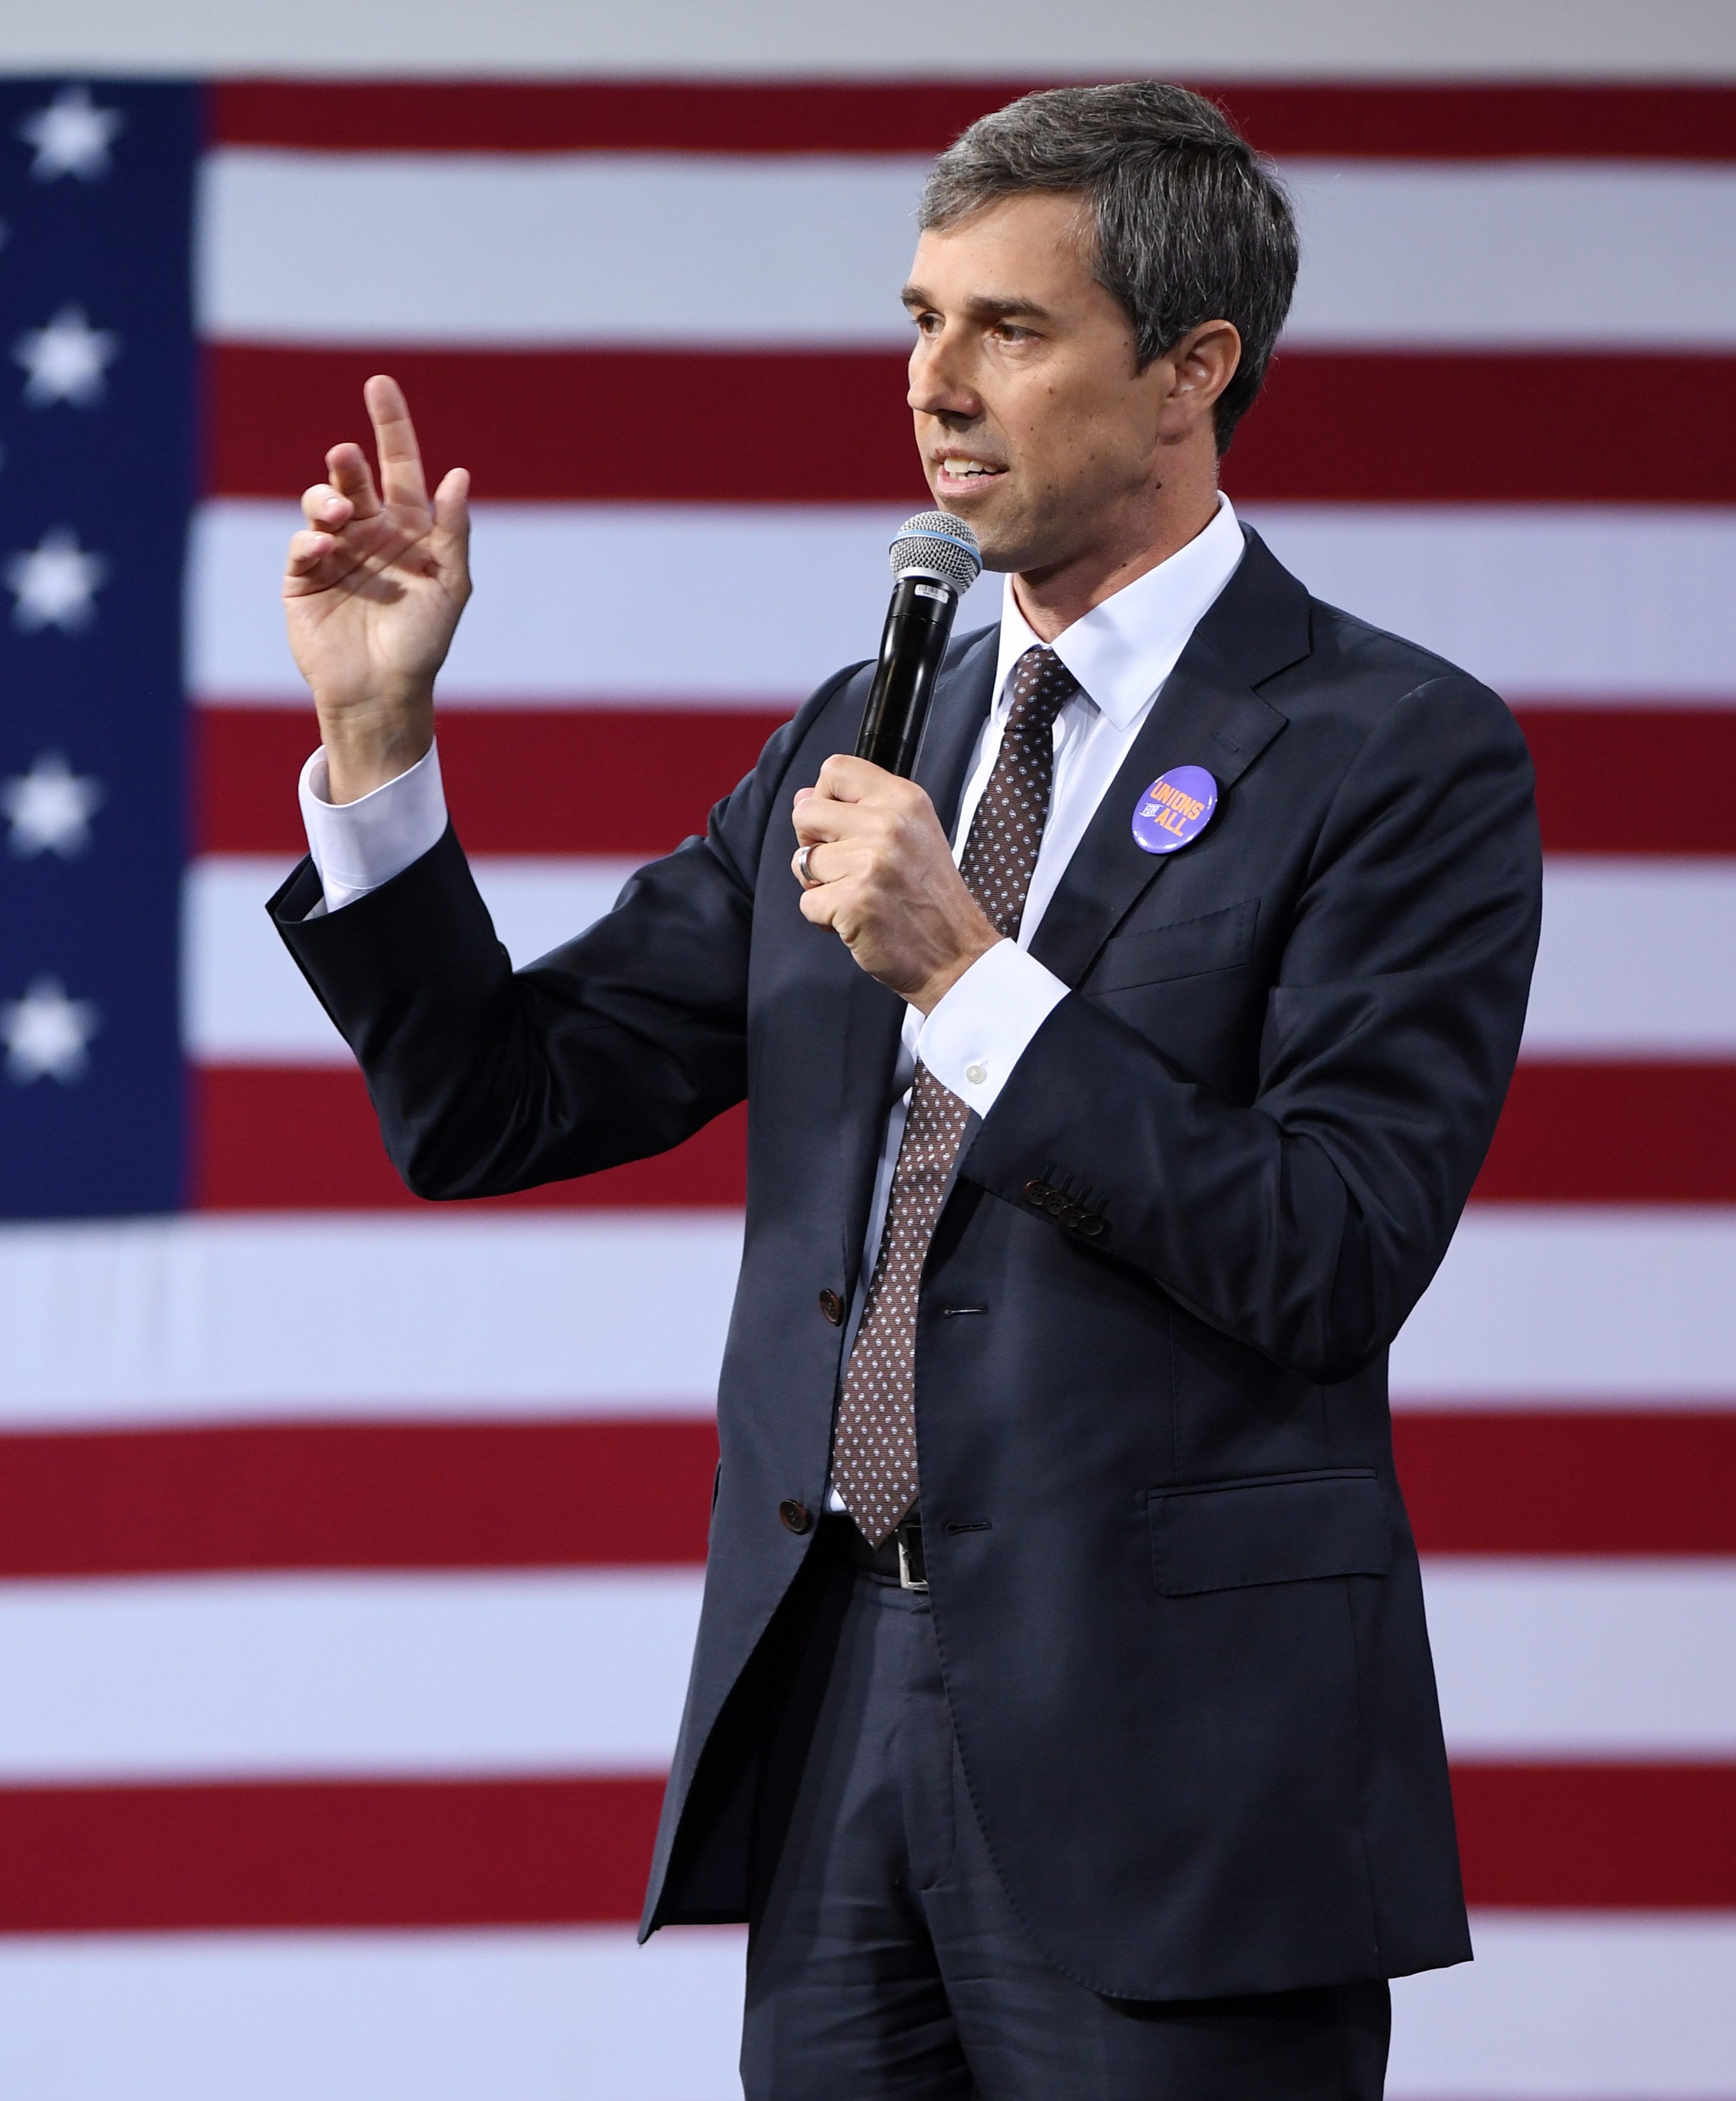 Beto O'Rourke walks tightrope on immigration, border policy